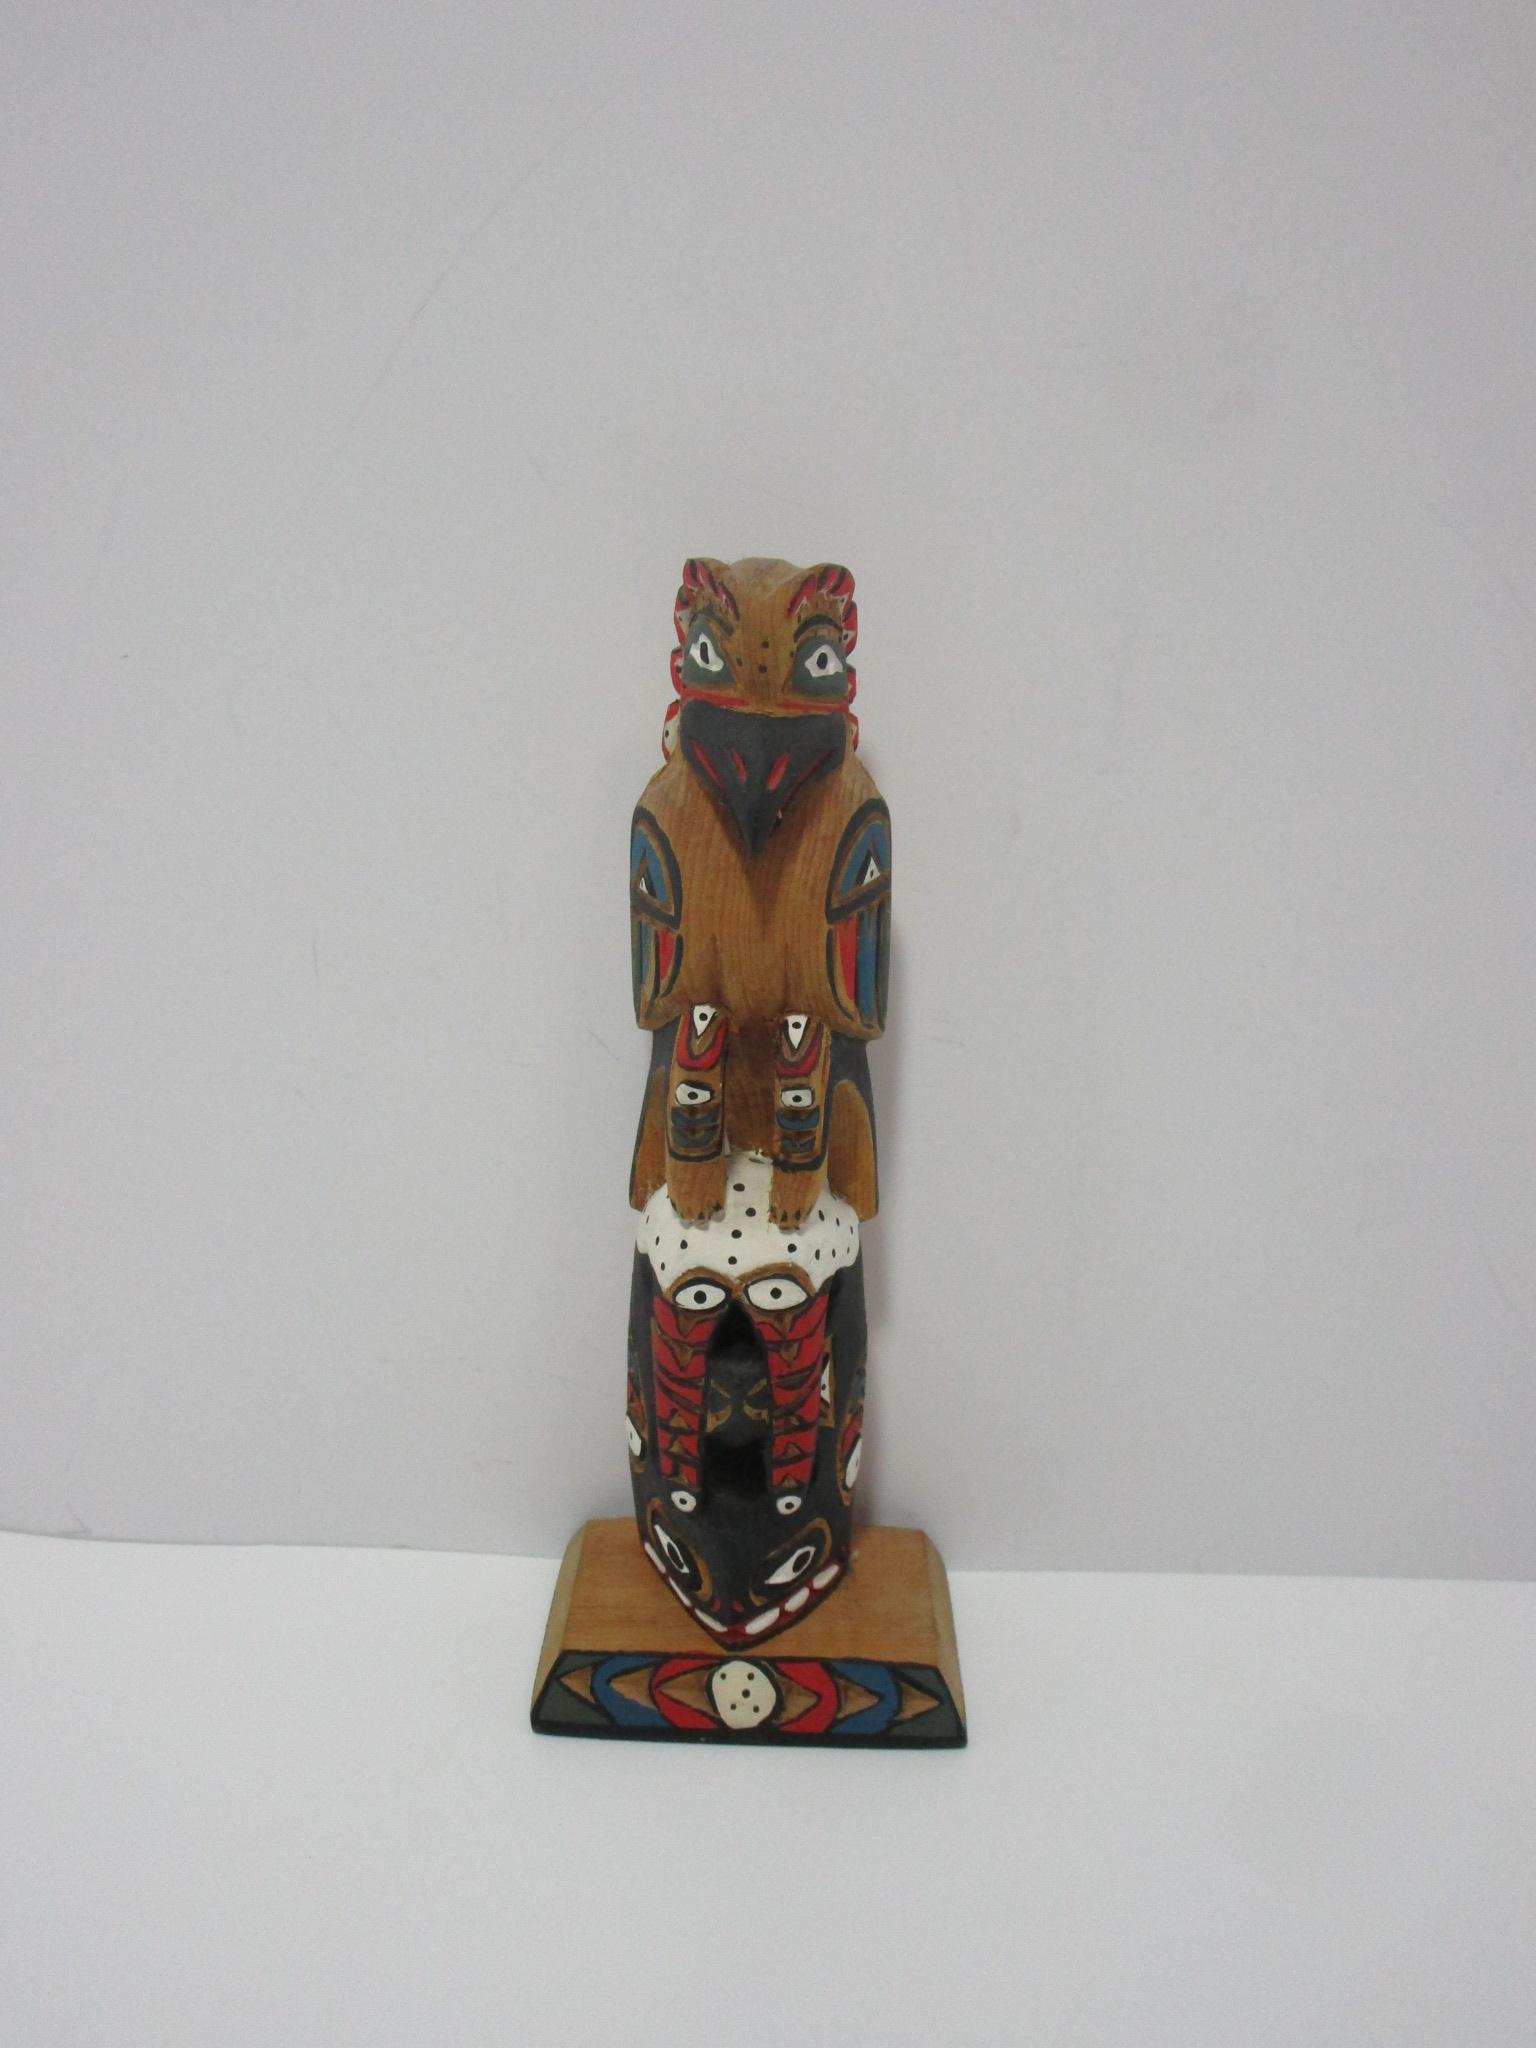 Hand Carved King Orca Kachina Doll.  6 5/8"  Artist Signature Carved on Back